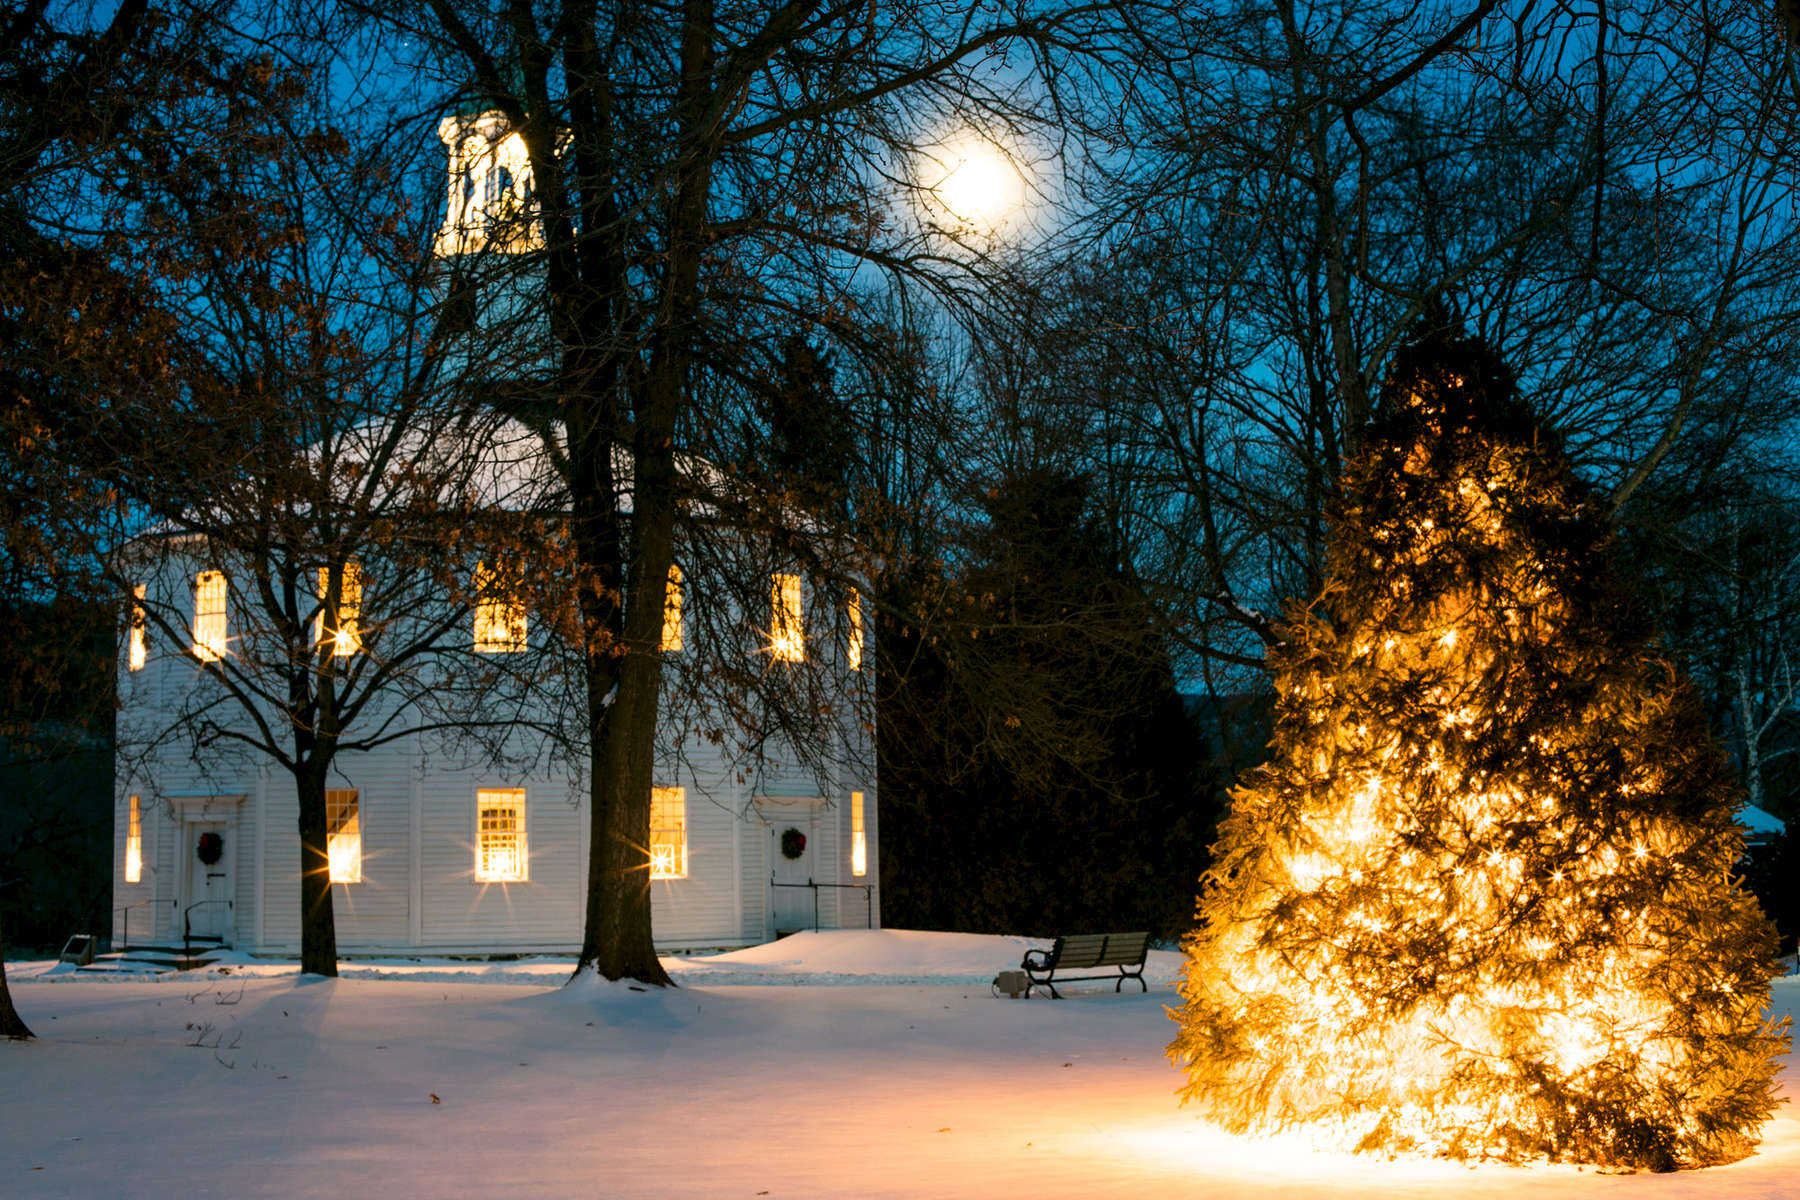 Night time long exposure photography of the Old Round Church with Christmas trees on January 22, 2016 in Richmond, Vermont. Shot by Reciprocity Studio for Efficiency Vermont